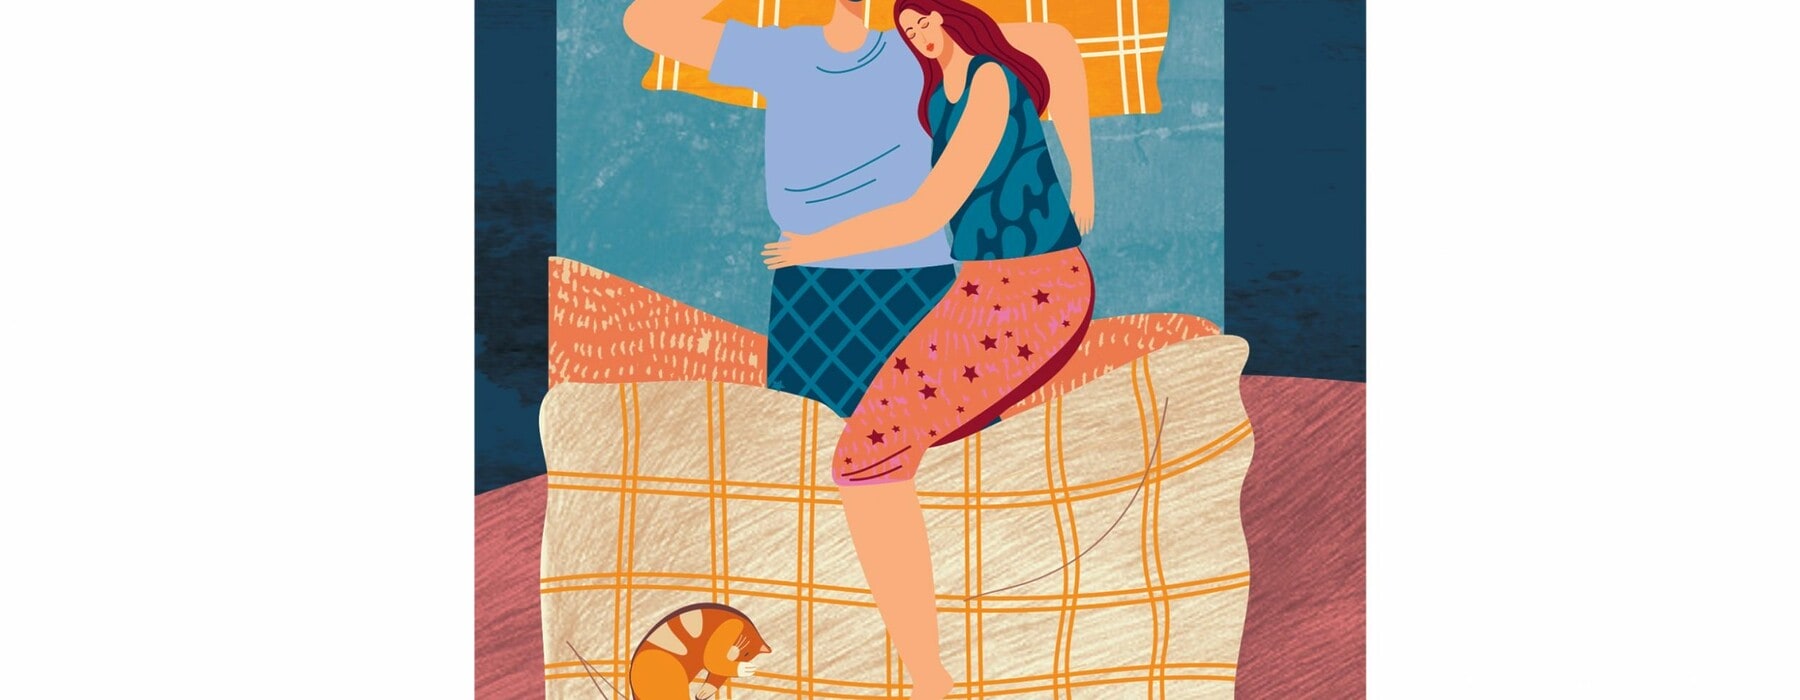 Illustration of couple sleeping in bed